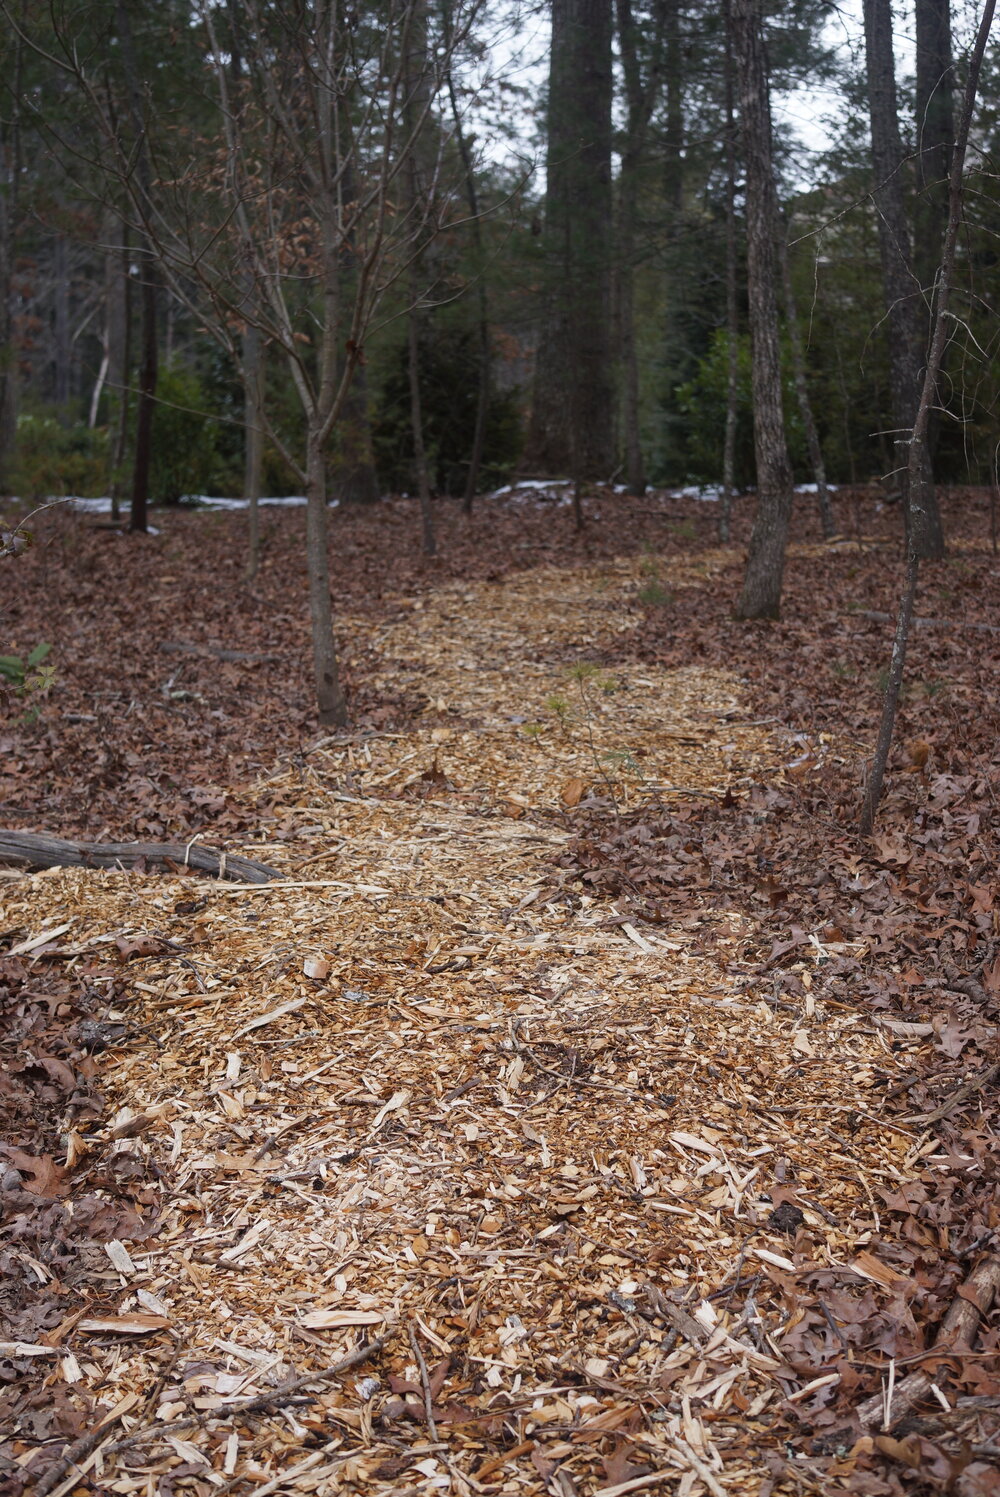  Our clients wanted to keep the forest intact and experience it. We put down this mulch path for their wanders. 